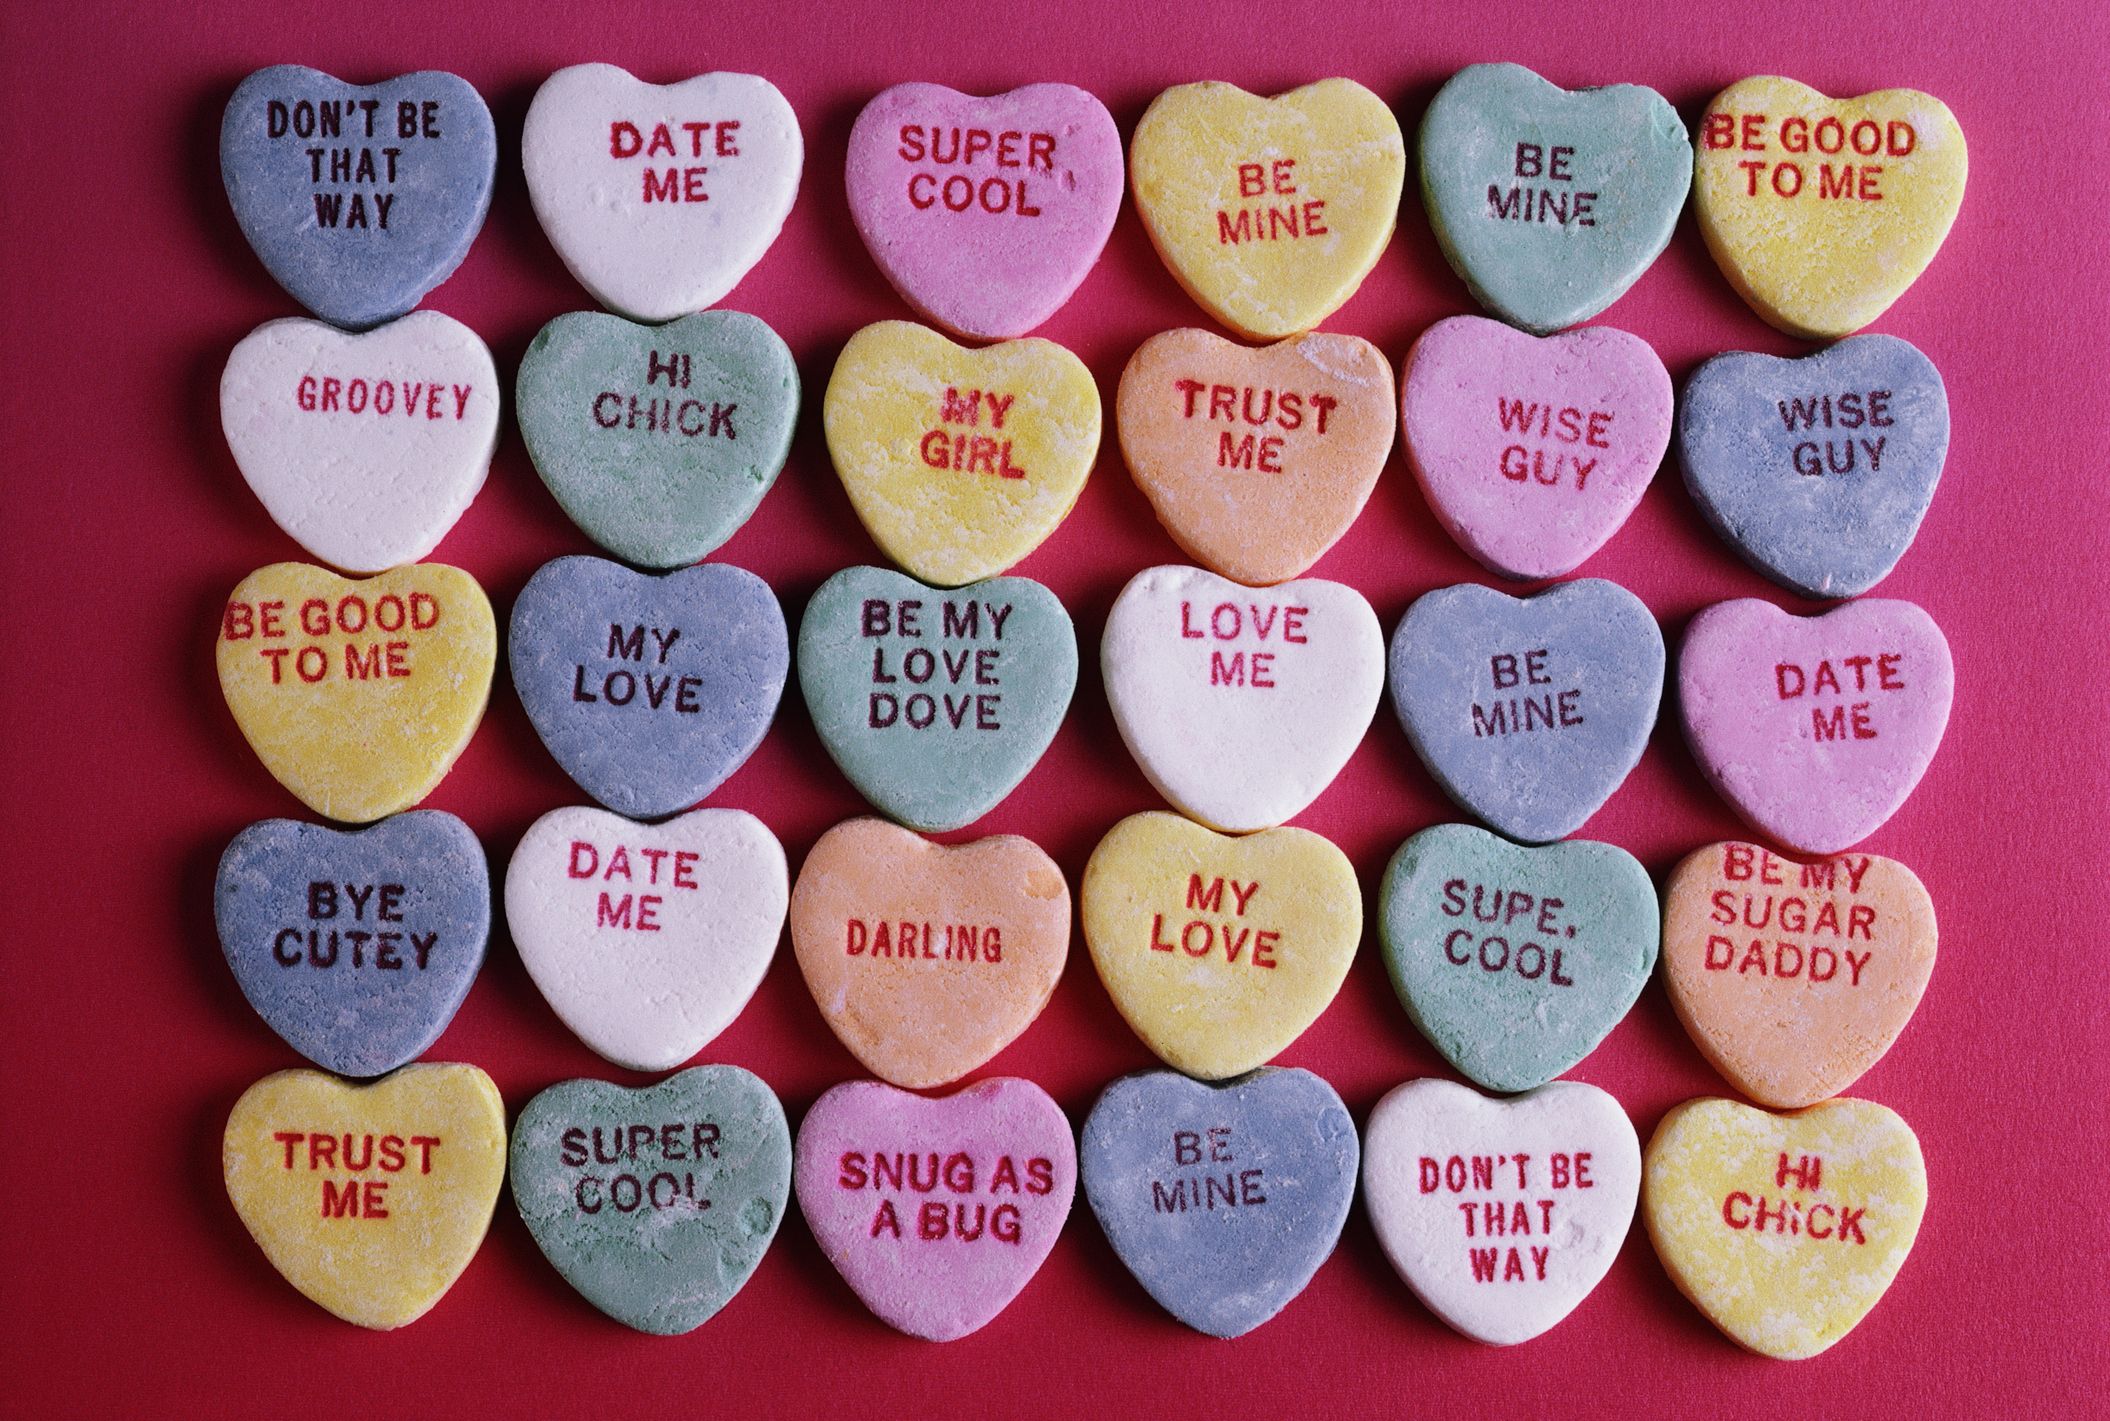 Where did those sweet candy heart sayings come from? (1920s to